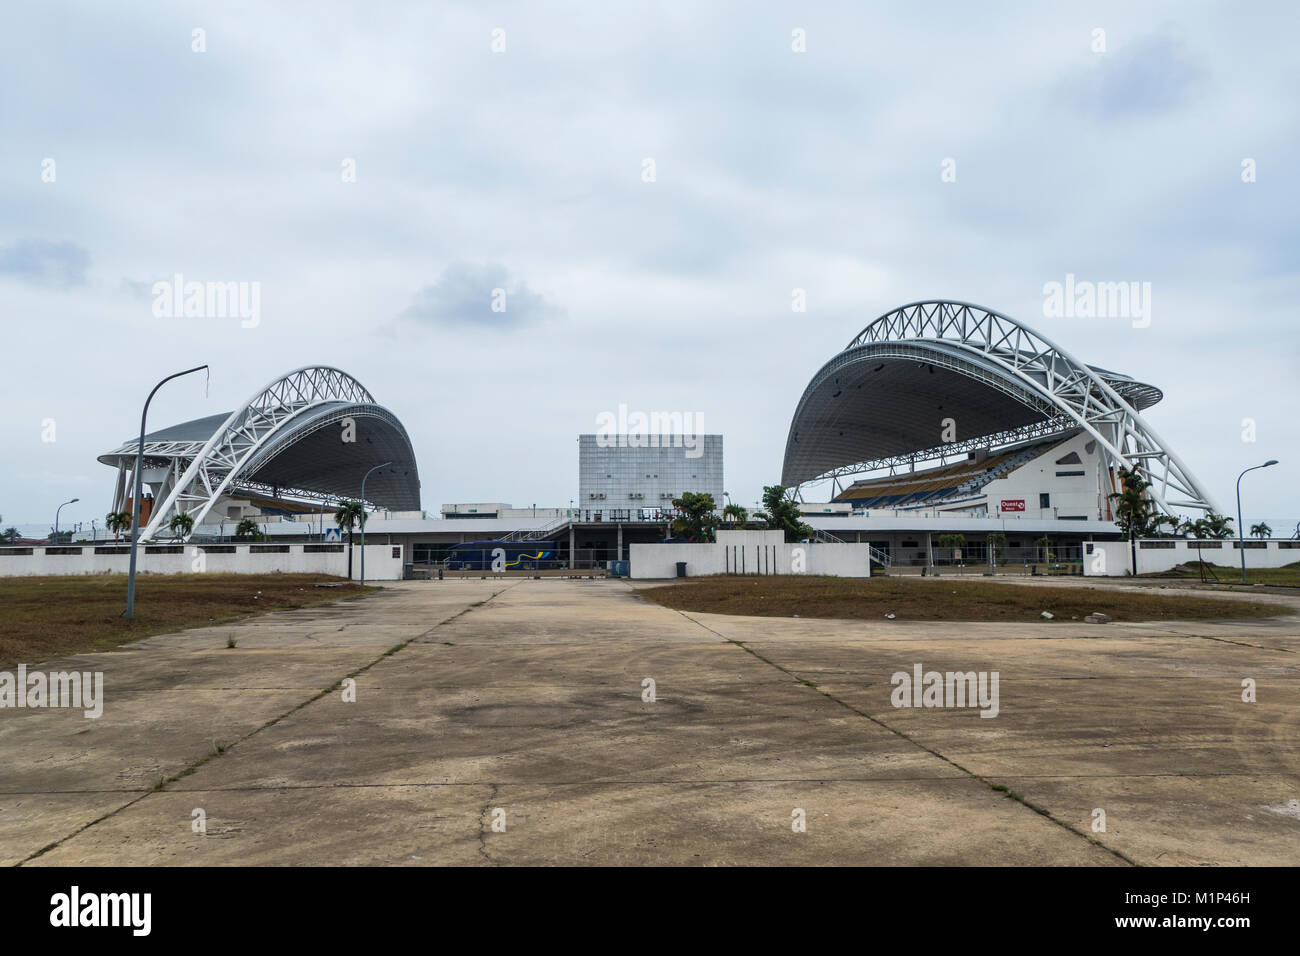 Soccer stadium Angondje built for the Africa Cup of Nations, Libreville, Gabon, Africa Stock Photo